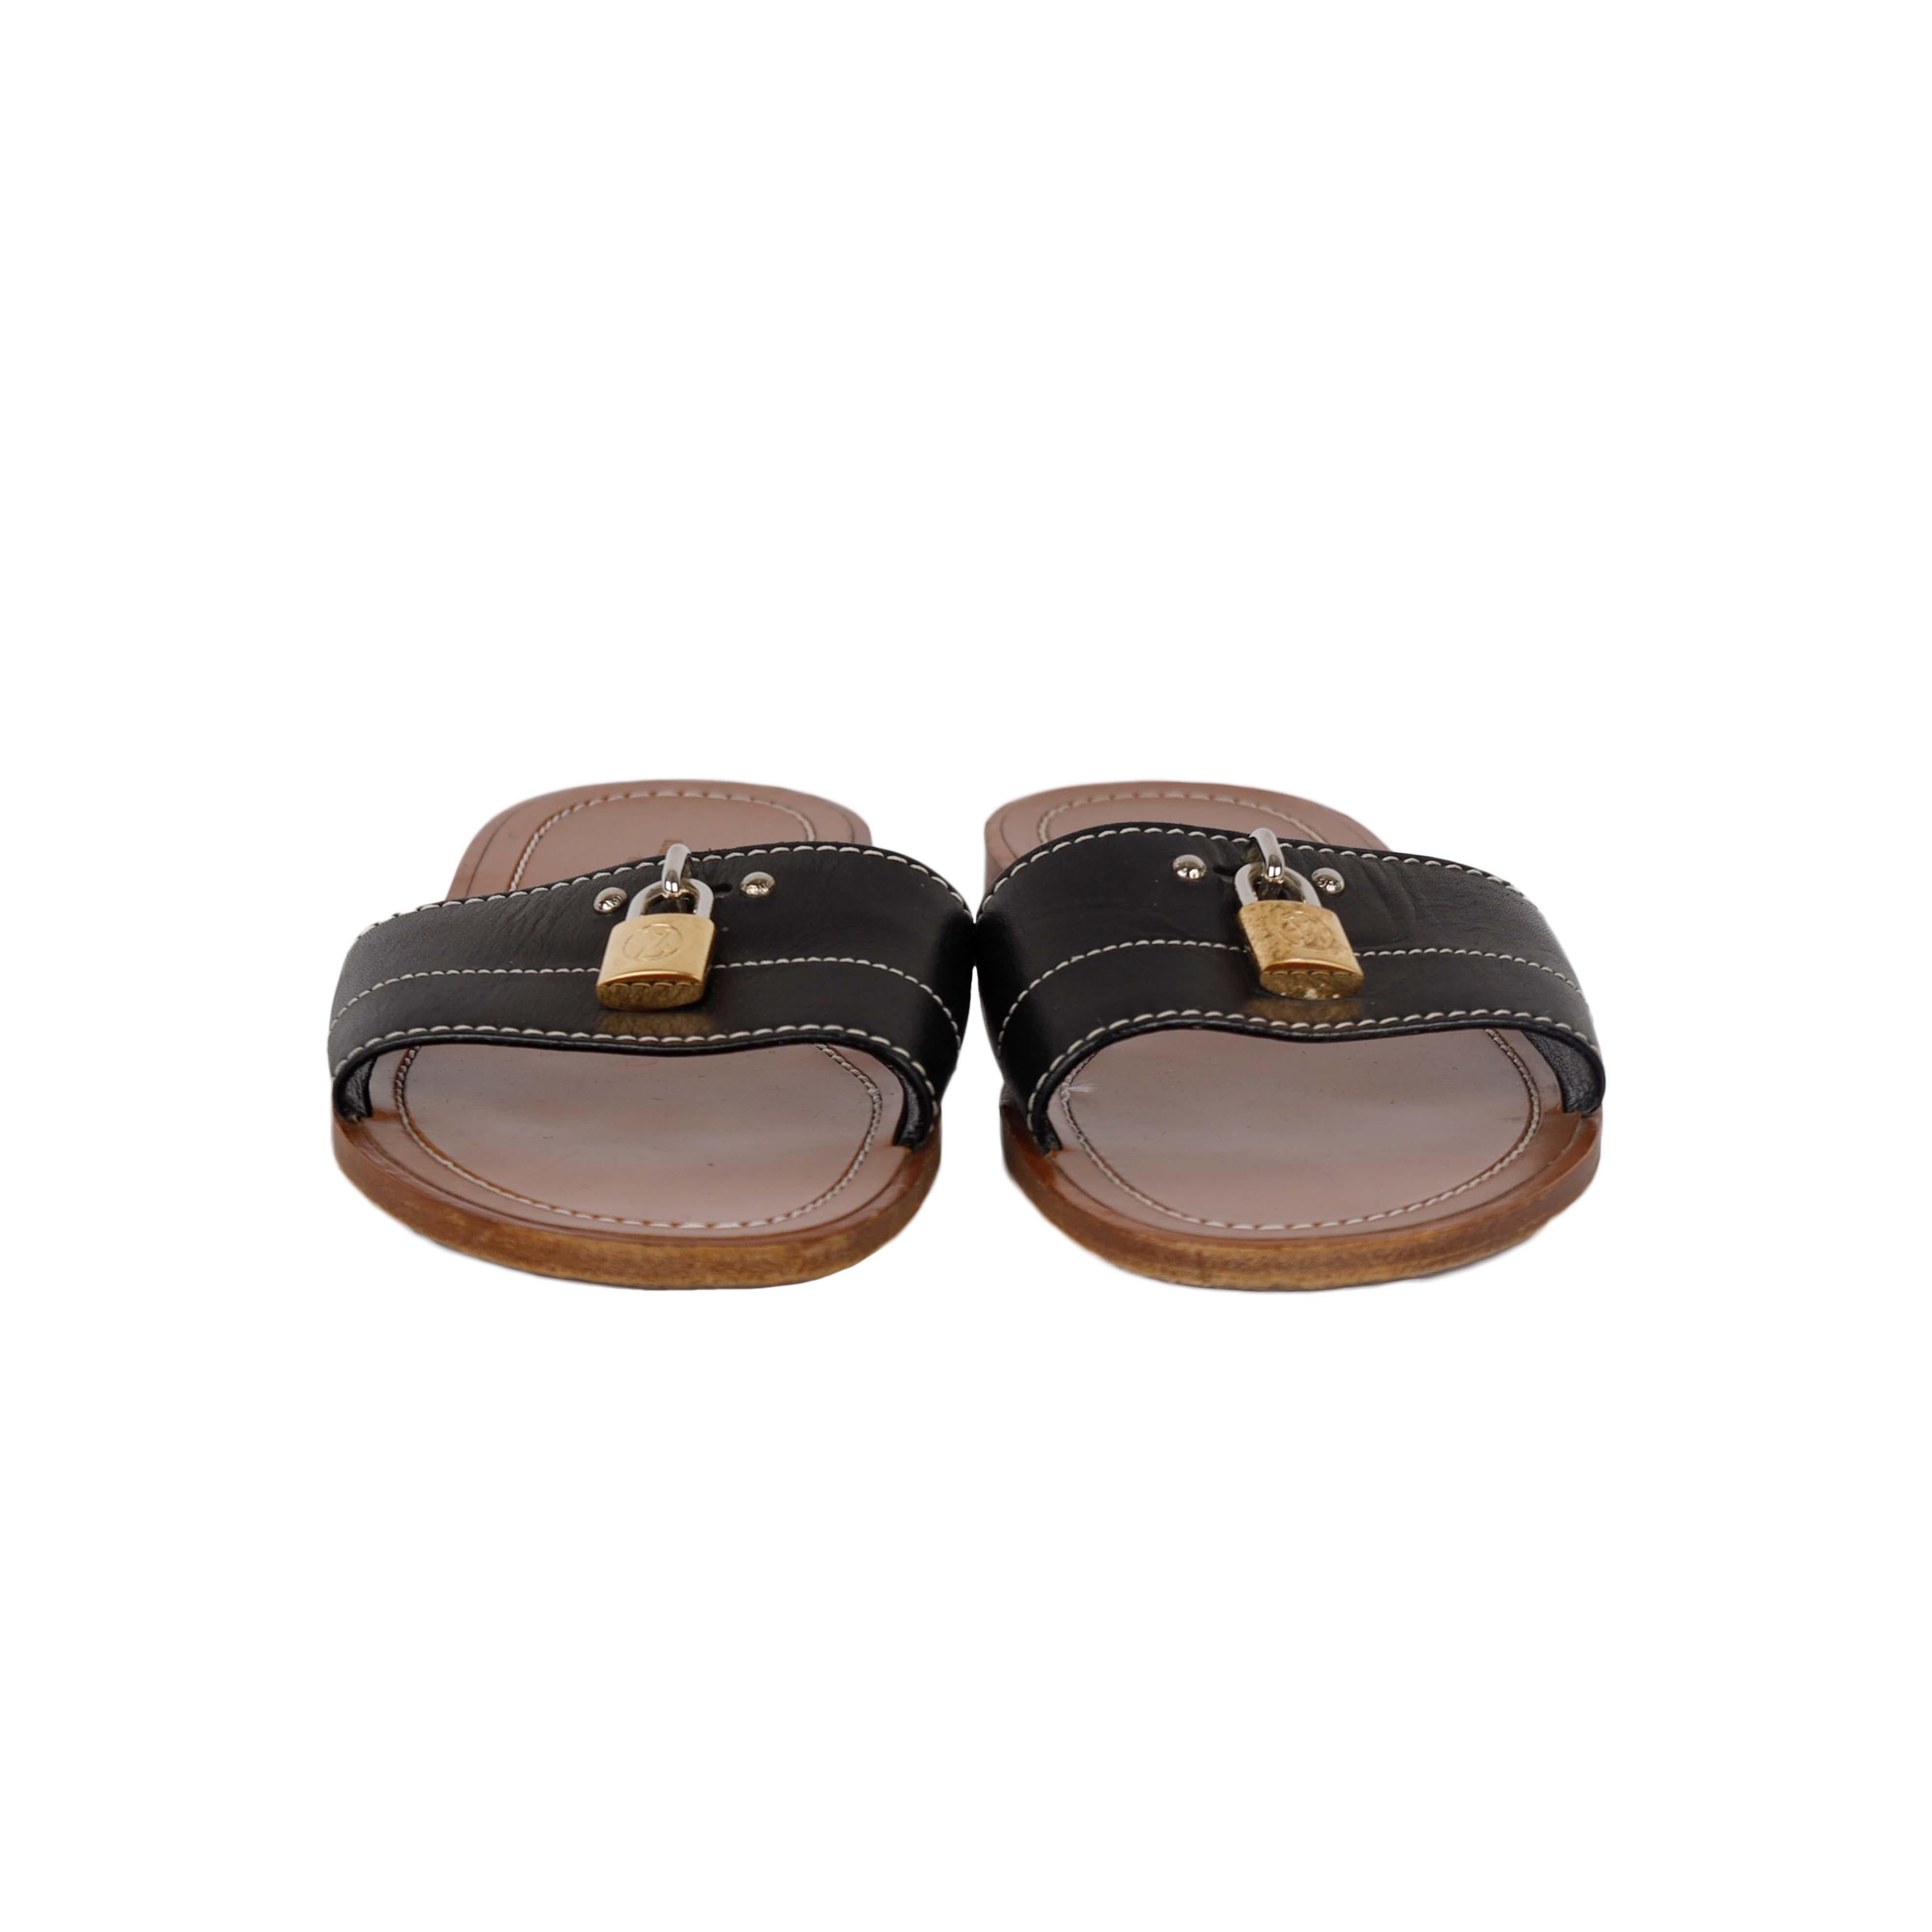 The Louis Vuitton LockIt Flat mule is a summer sandal that highlights unique brand elements such as the etched brand name on the metal attachments and the brand lock. The stitching further throws light on the exquisite craftsmanship of the